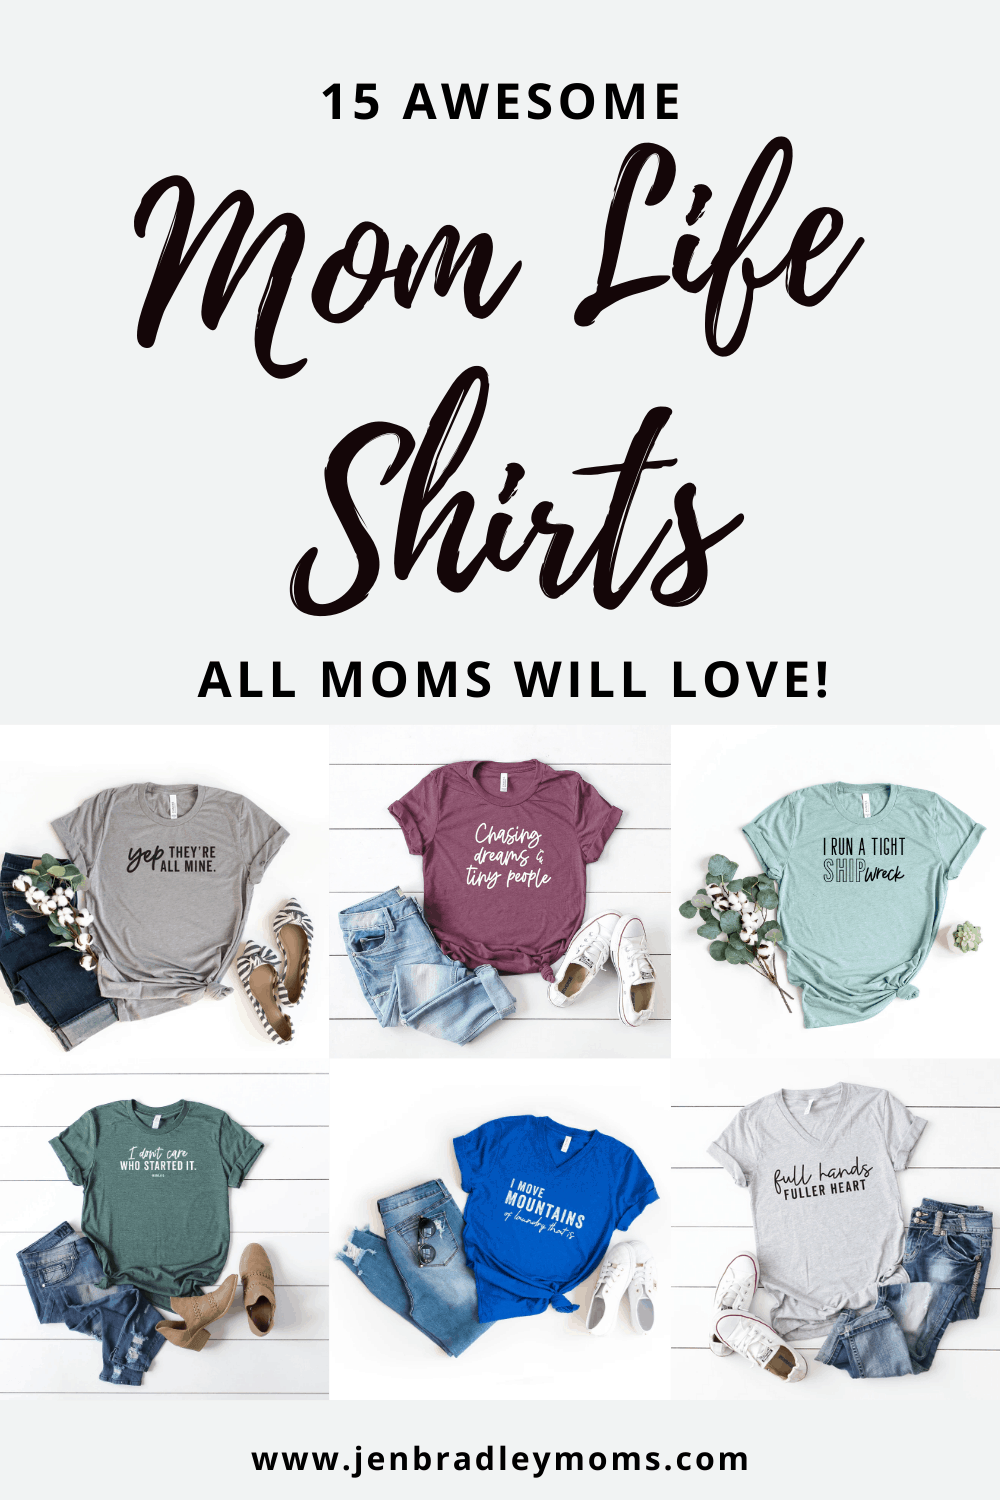 15 Hilarious Mom Life Shirts You Need for Your Comfy Mom Wardrobe